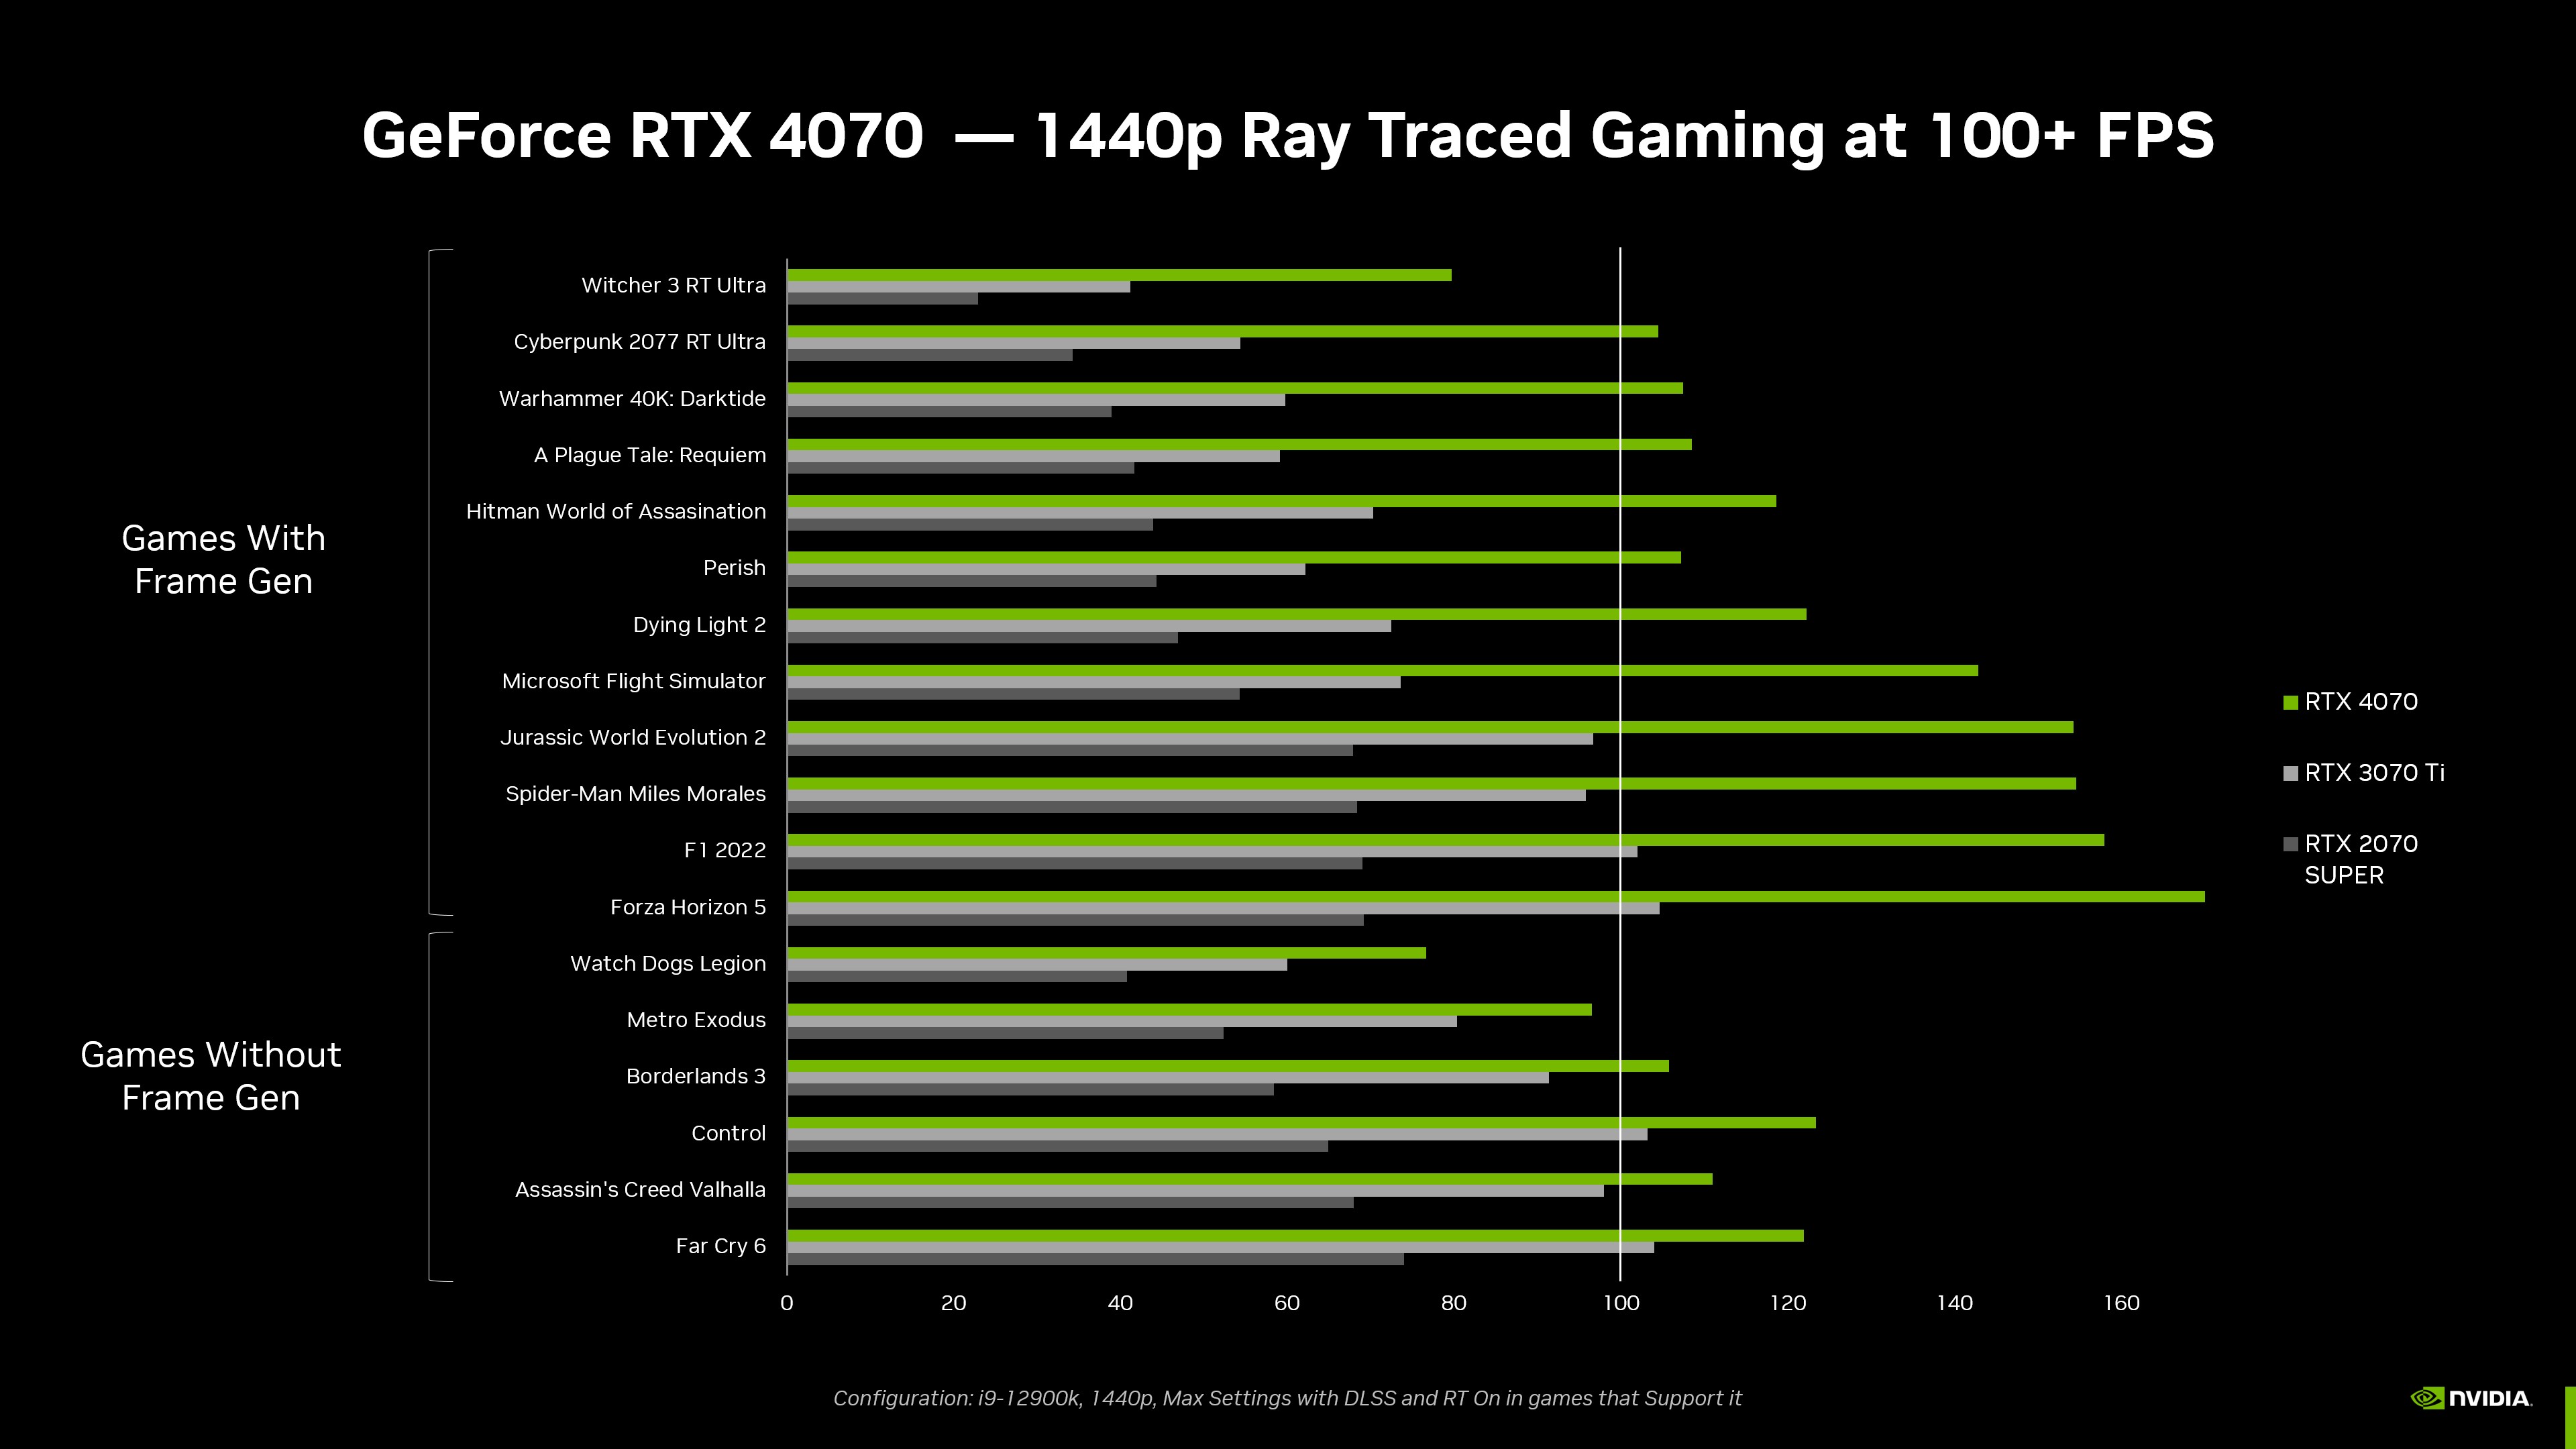 Galax Geforce RTX 4090 is Mine Now - Sometimes I Play Games